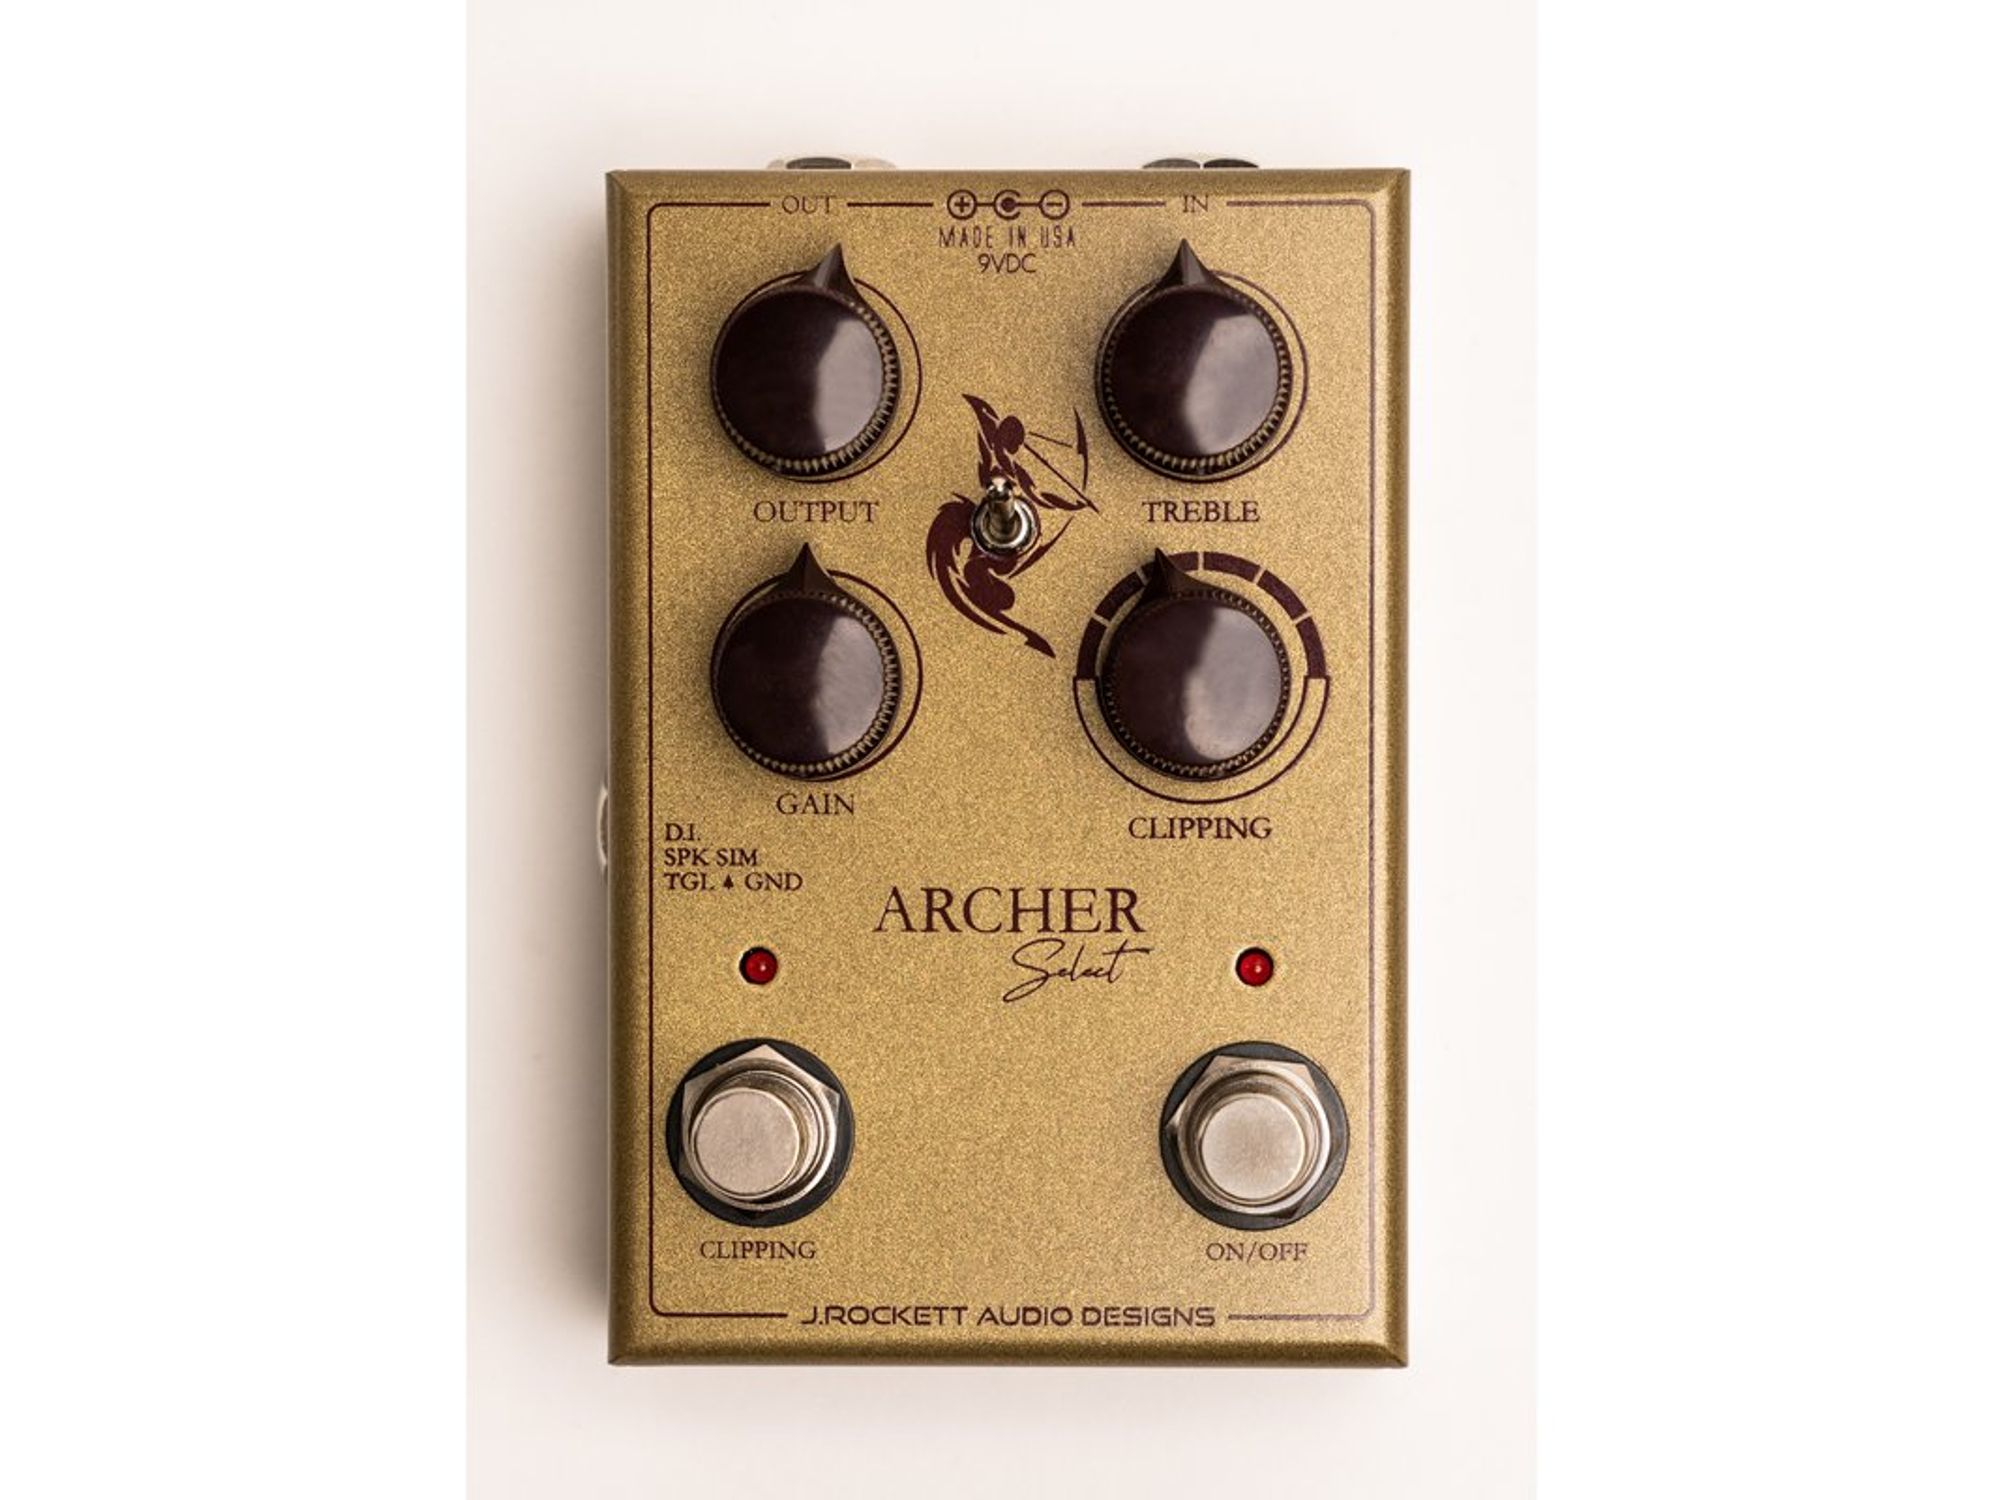 J. Rockett Audio Releases the Archer Select